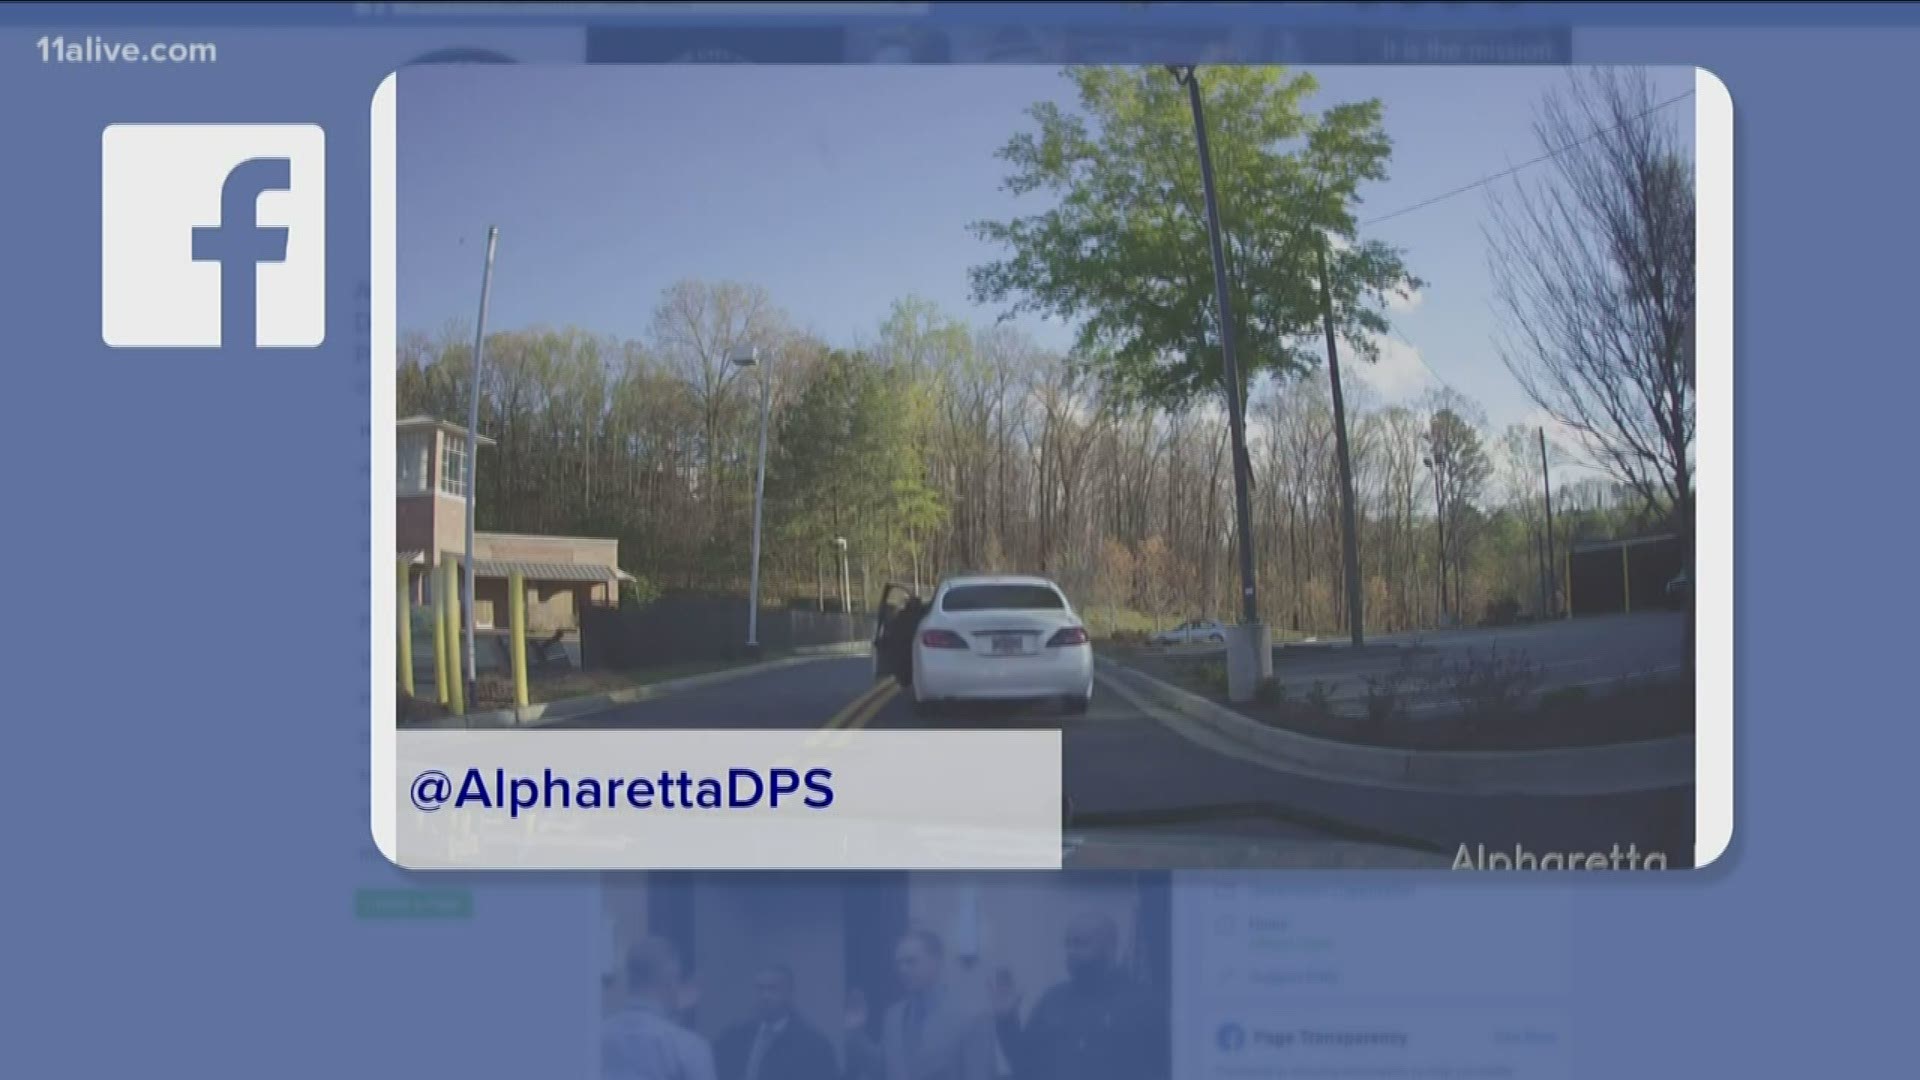 Alpharetta Department of Public Safety said it happened on April 5. An officer said he saw a man driving recklessly on Old Milton Parkway and pulled the car over.